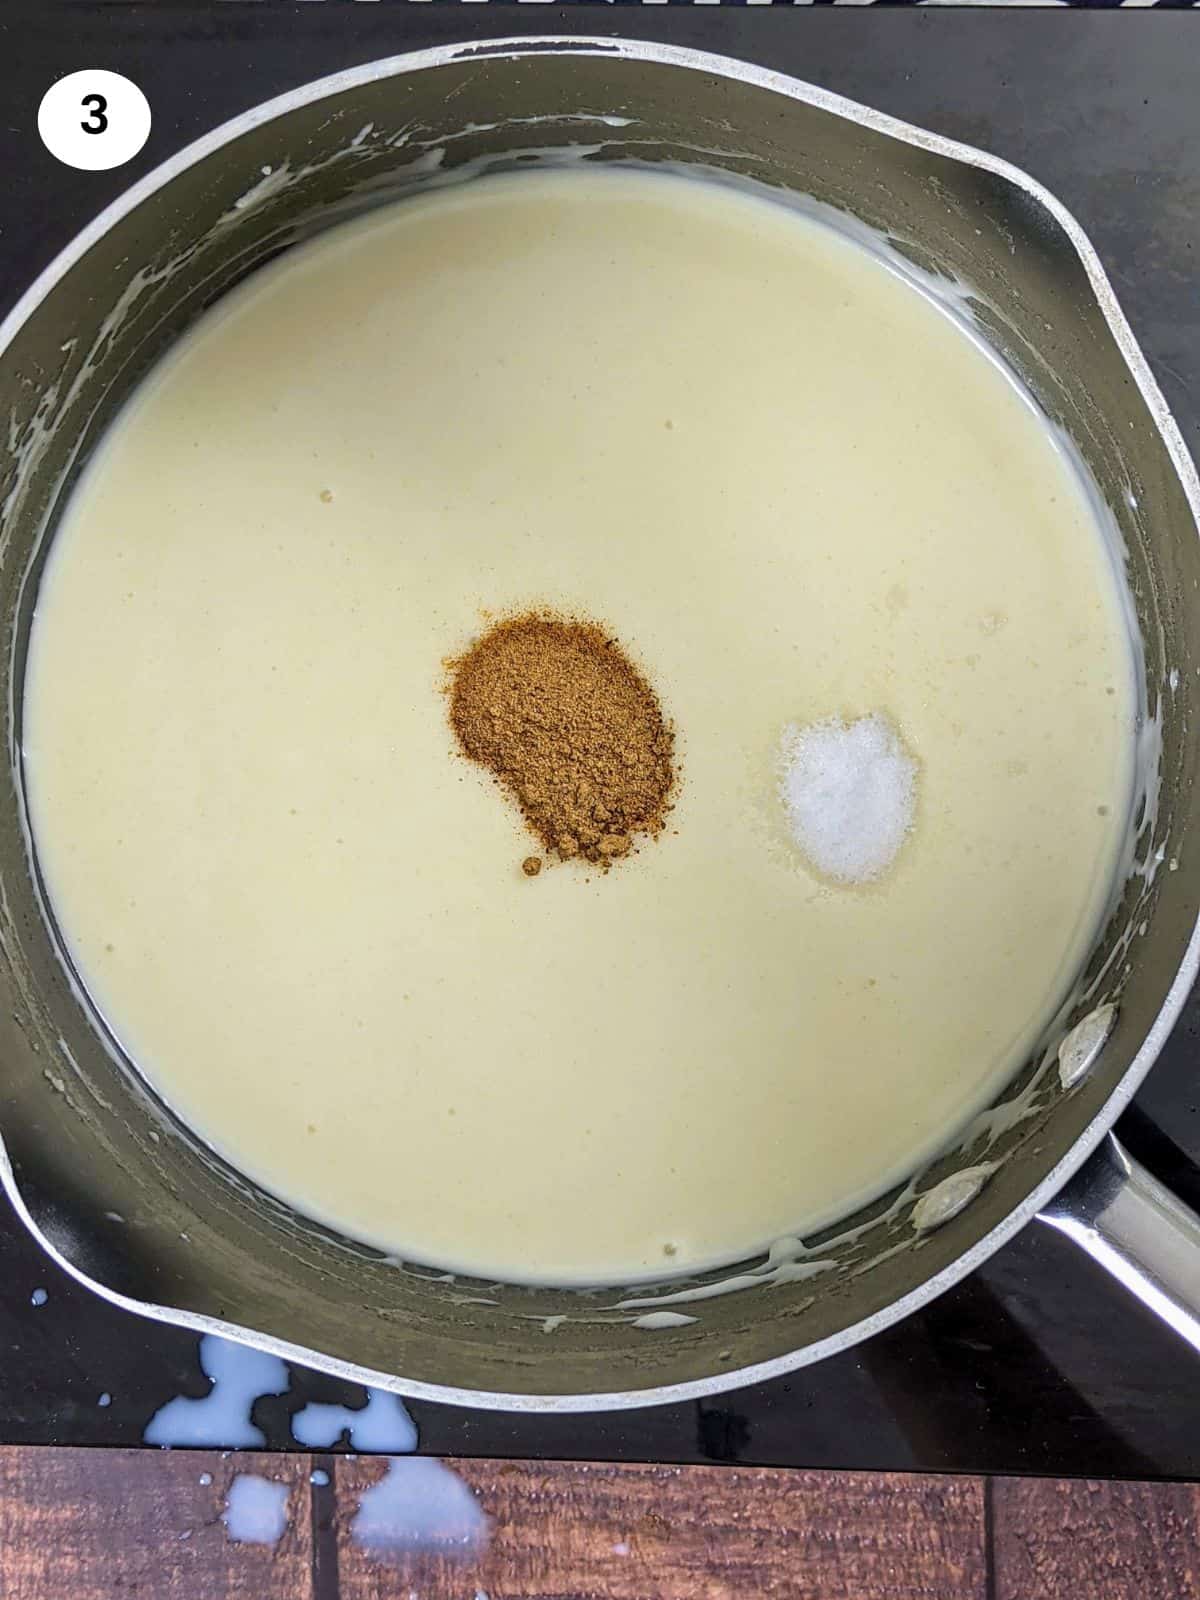 Adding the spices when the bechamel is ready.